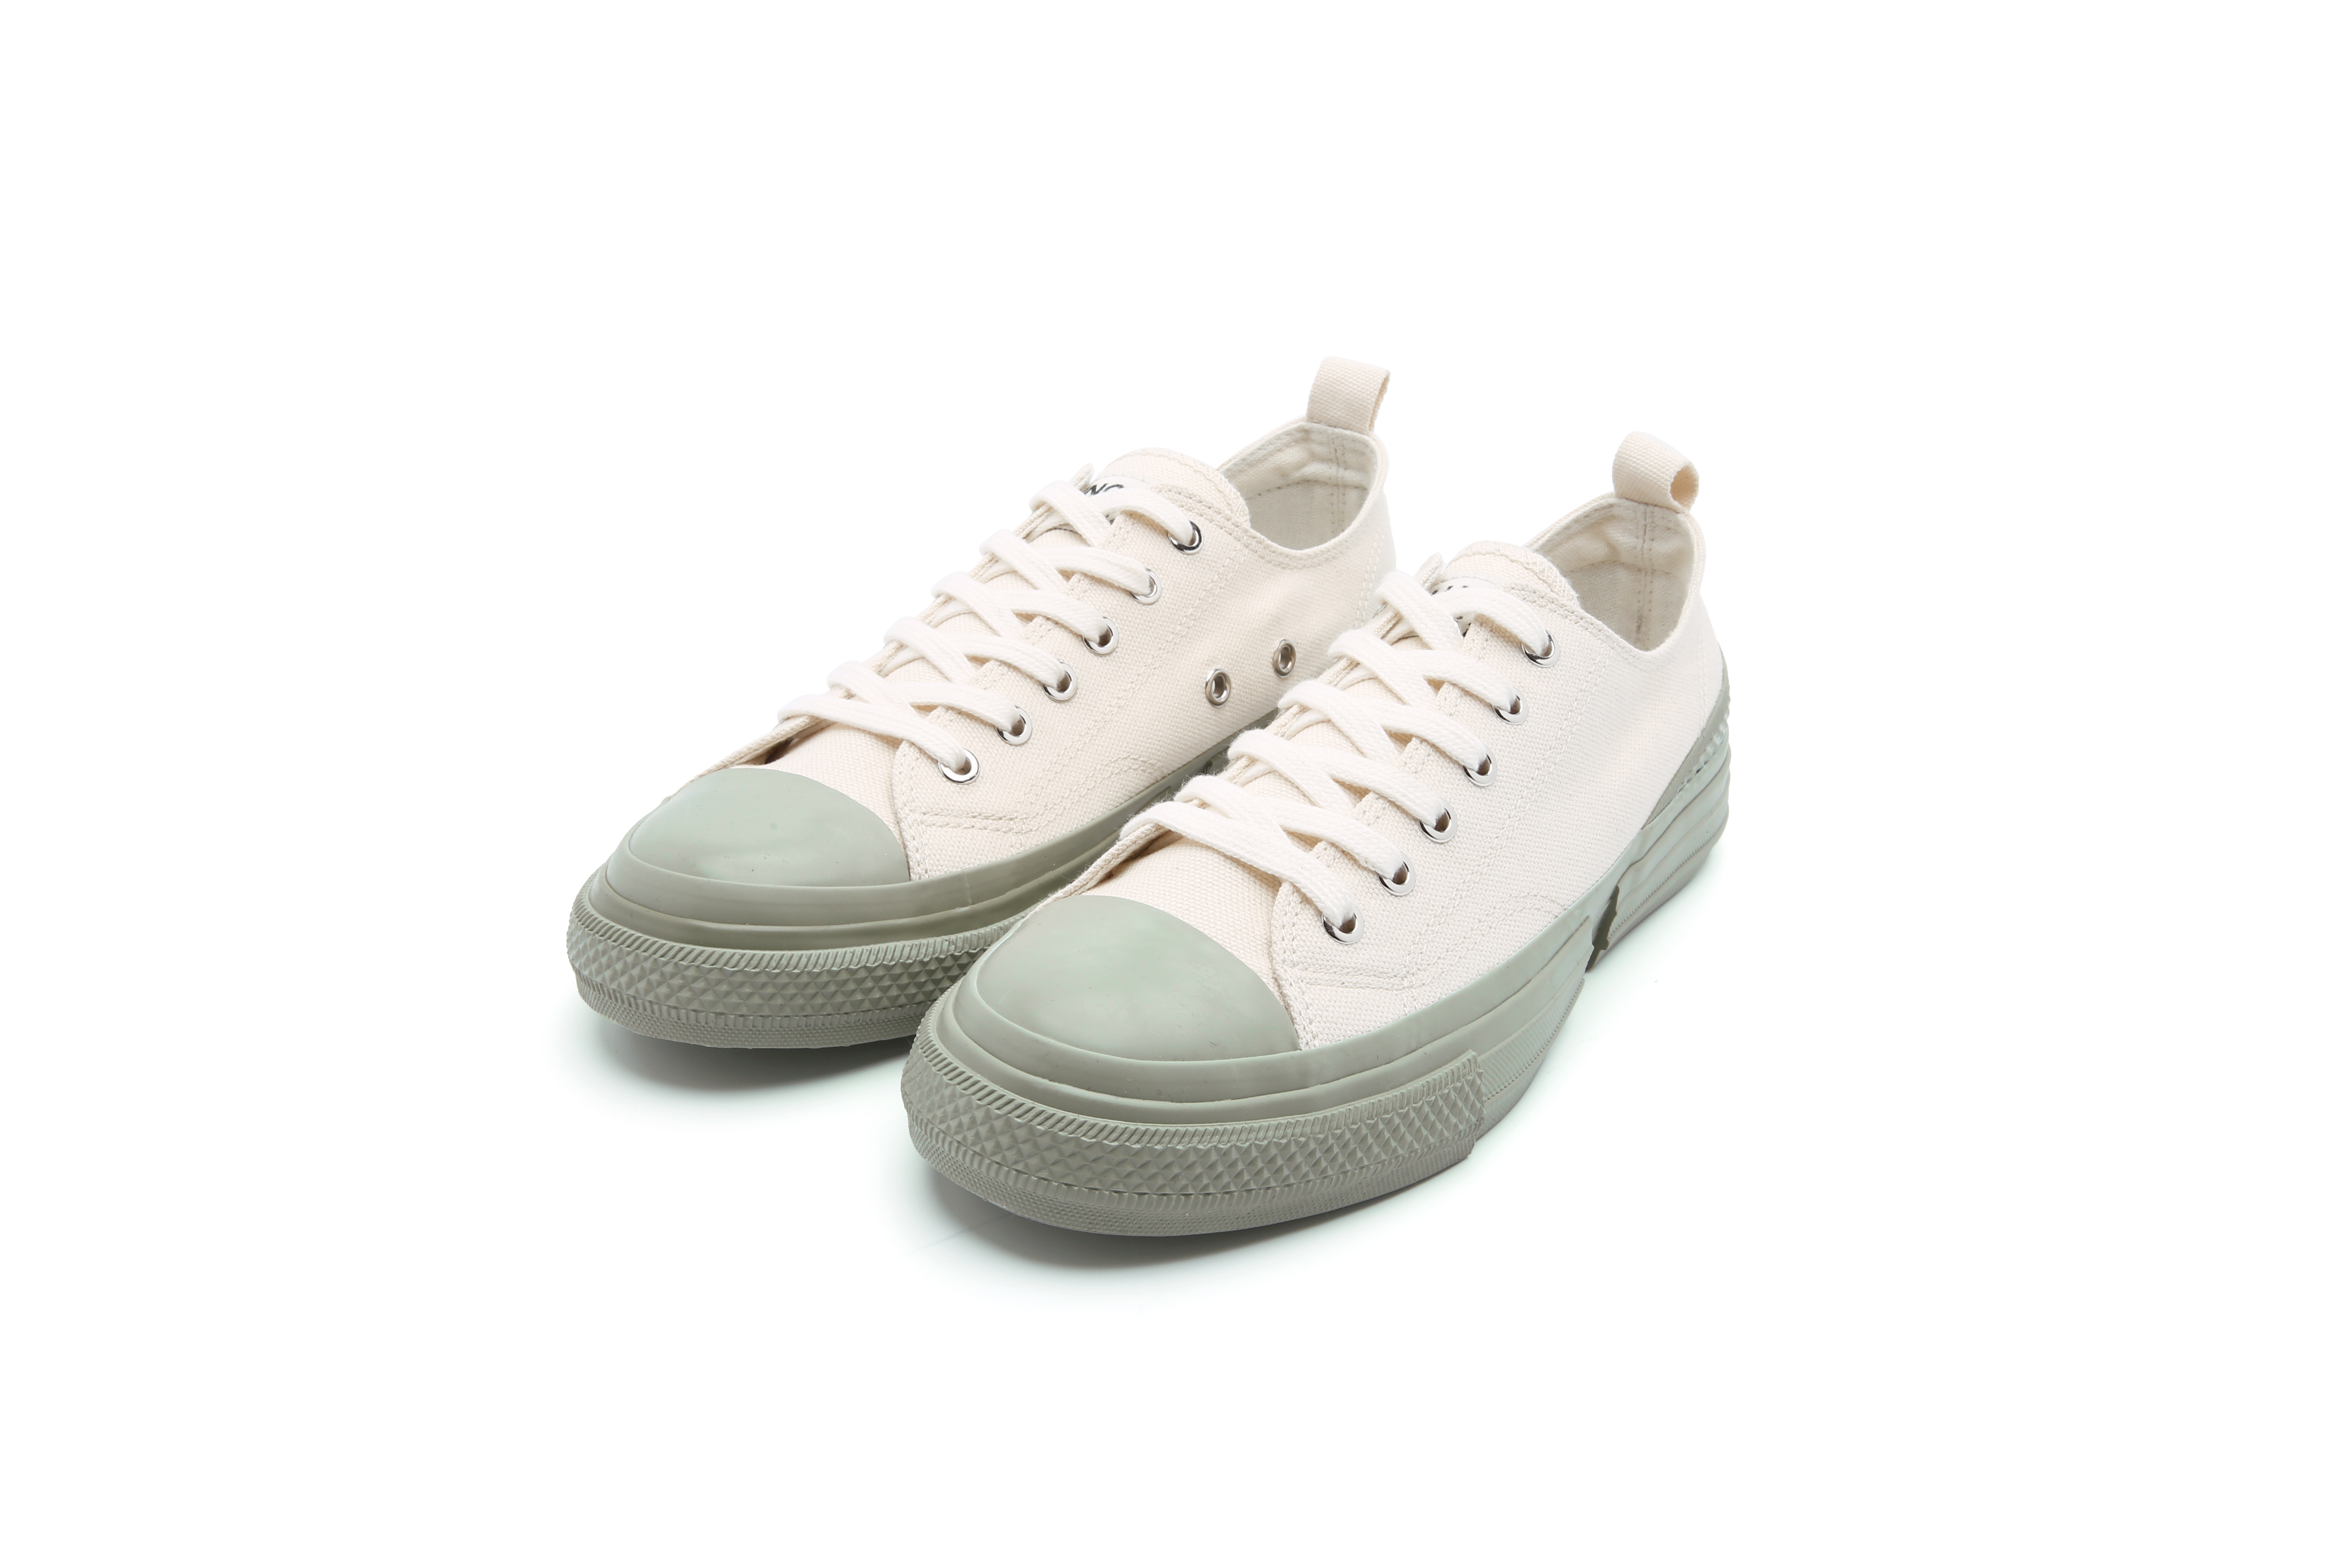 2020 Good Sales Popular High Quality White Ladies Canvas Shoes